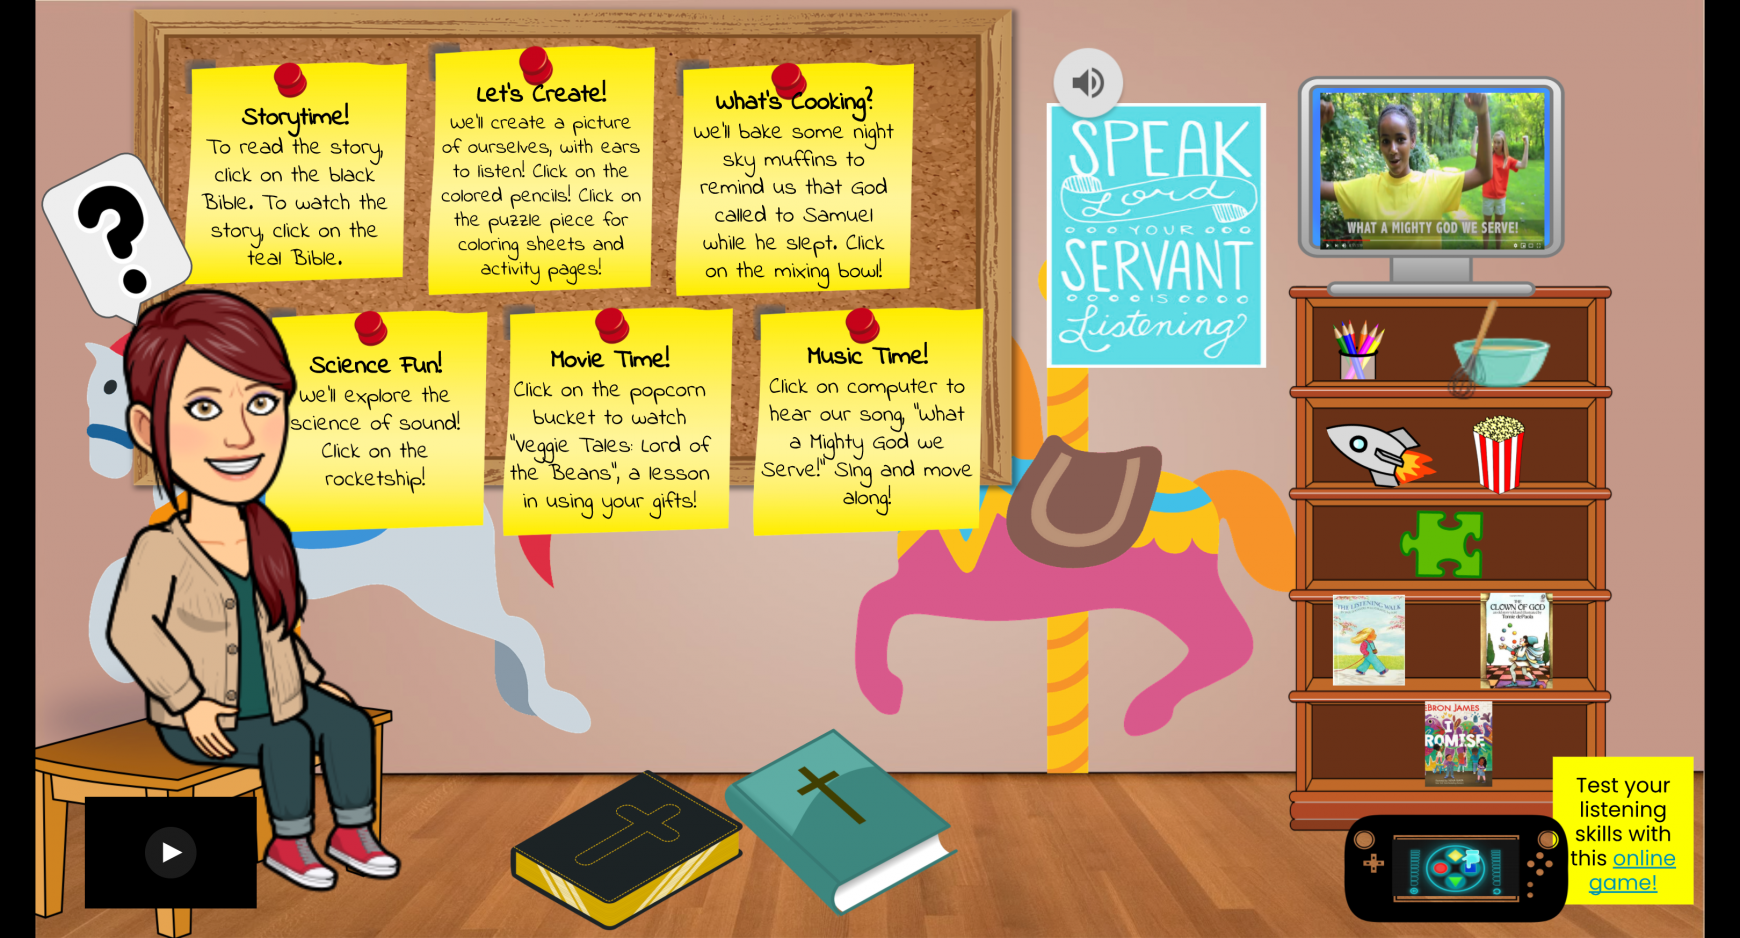 Welcome to our Virtual Christ’s Carousel classroom!